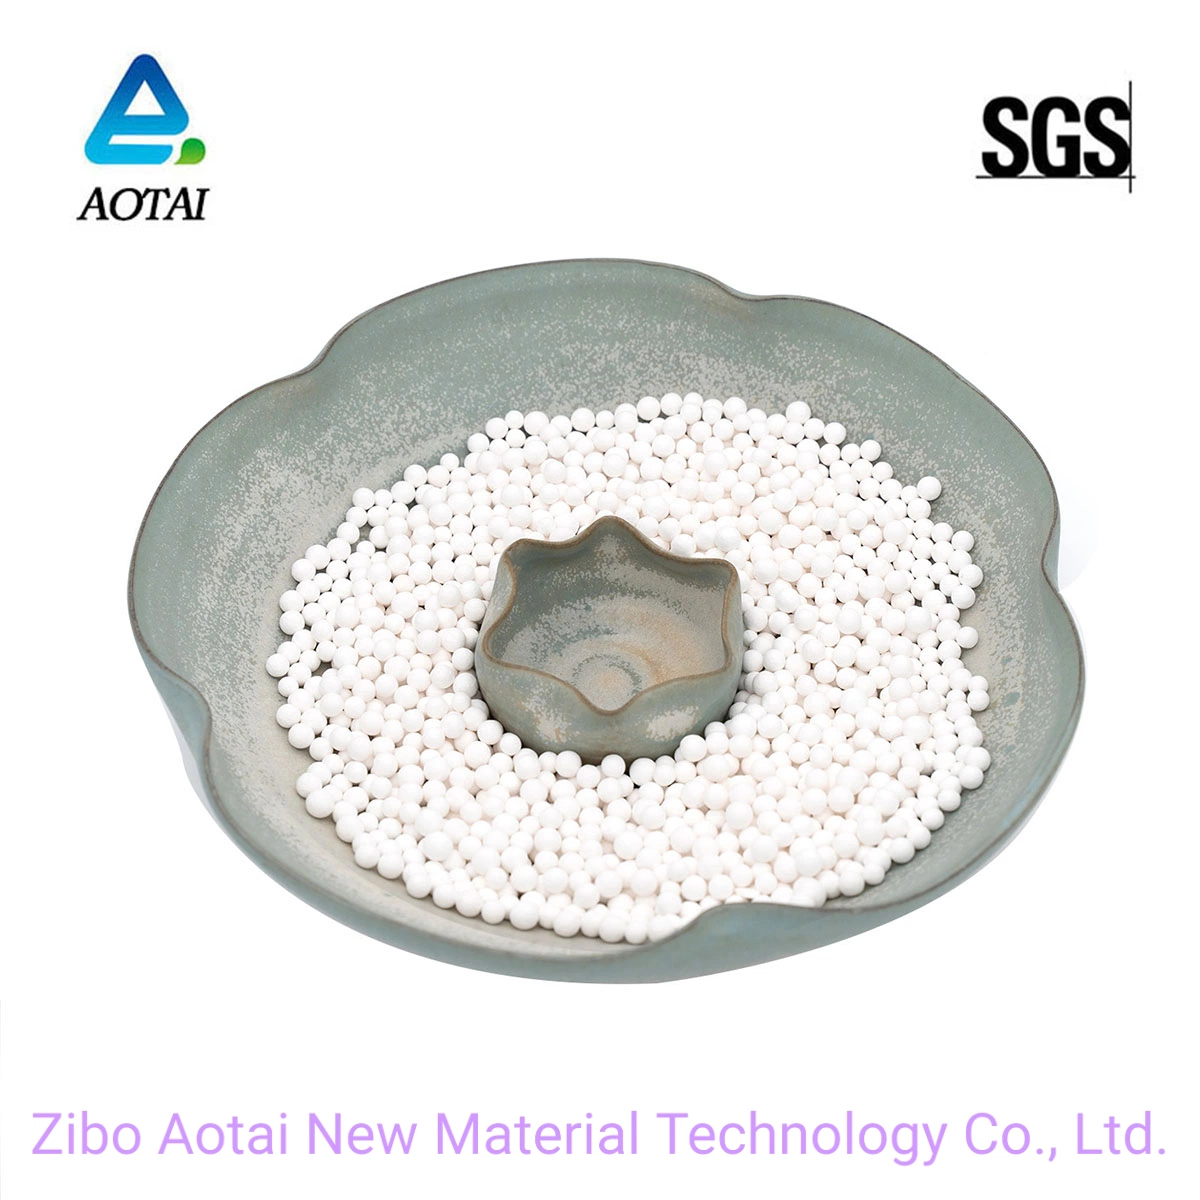 Activated Alumina CAS No. 1344-28-1: Non-Toxic, Insoluble in Water and Ethanol with Strong Ability of Moisture Absorption